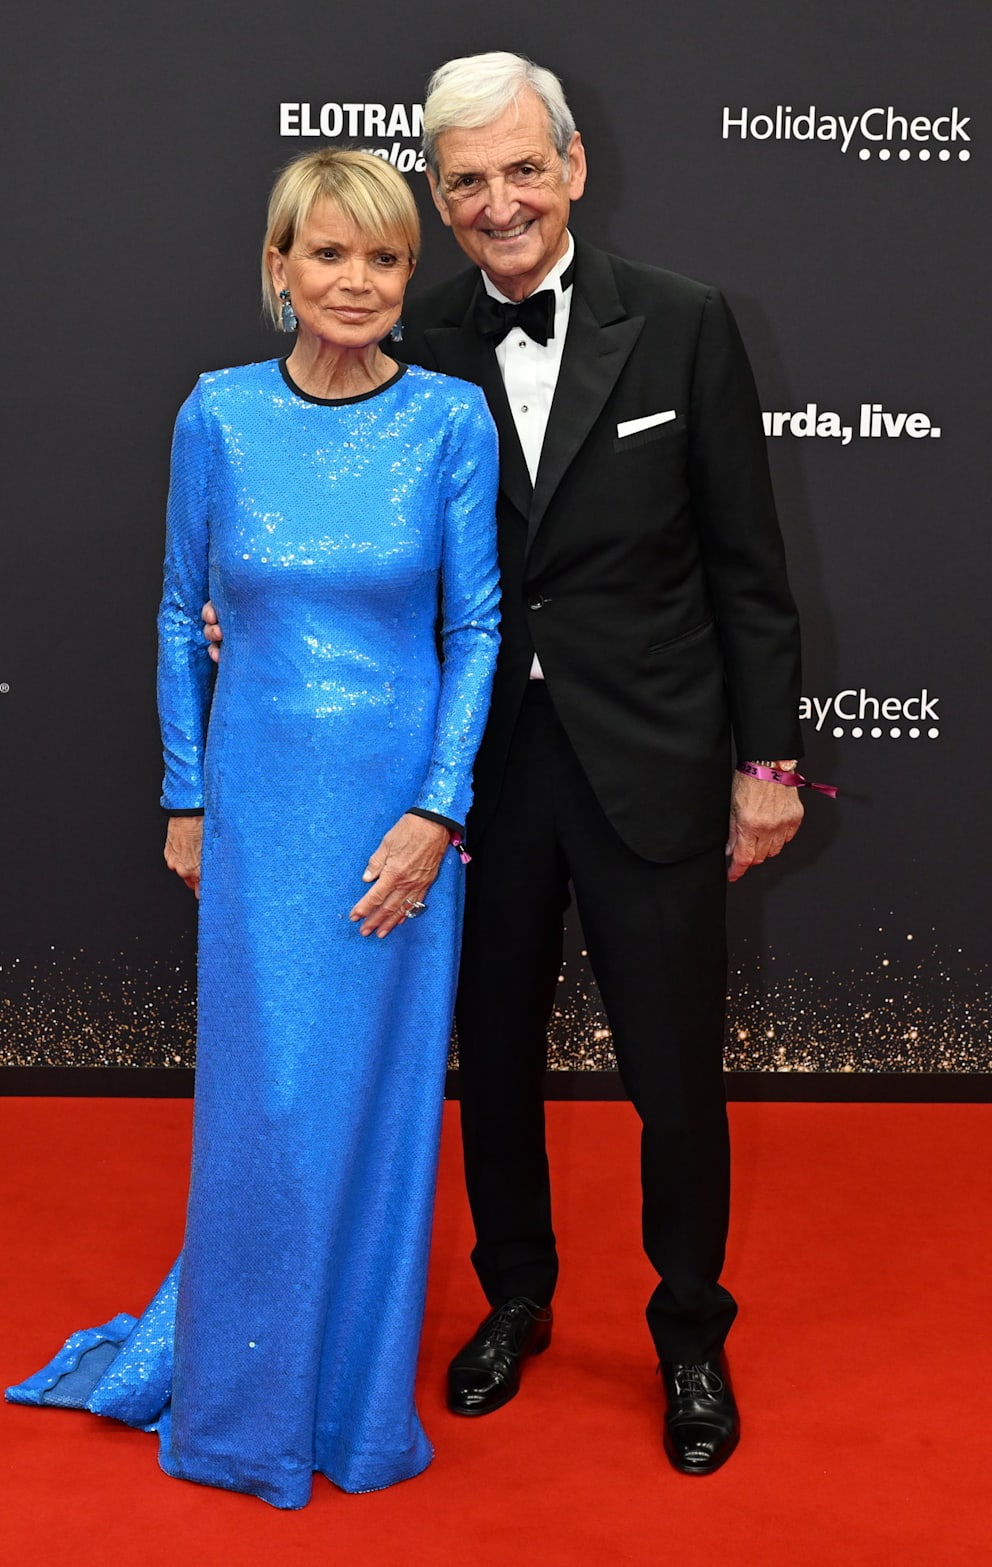 Sparkled in blue: Uschi Glas and husband Dieter Hermann